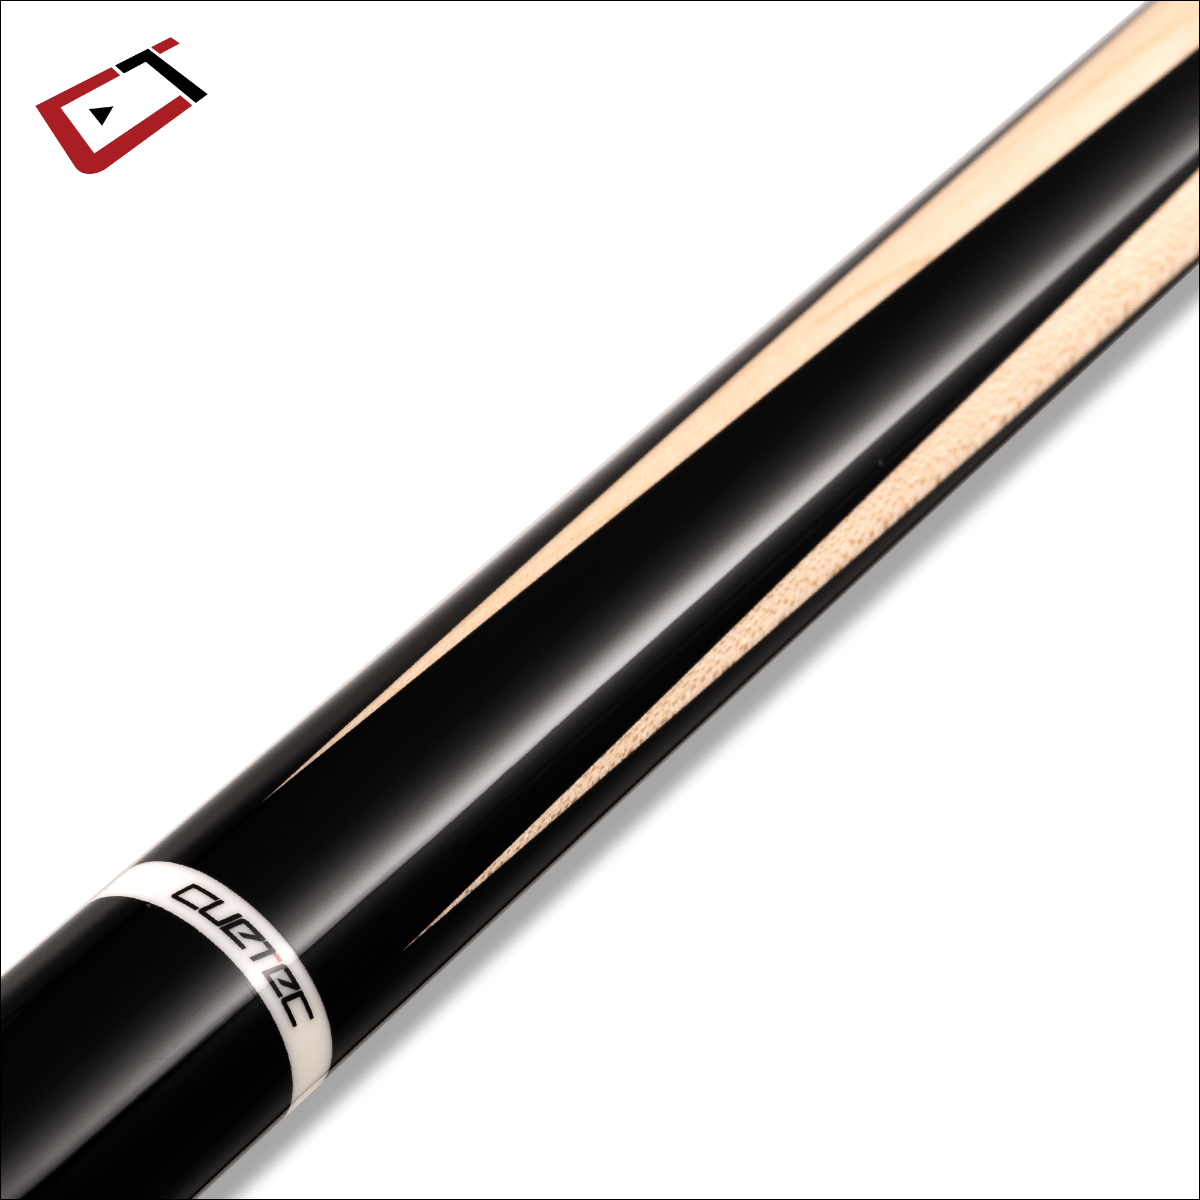 Imperial Pool Cue Imperial - AVID ERA Natural 4 PT Cue NW 12.75MM - 95-321NW